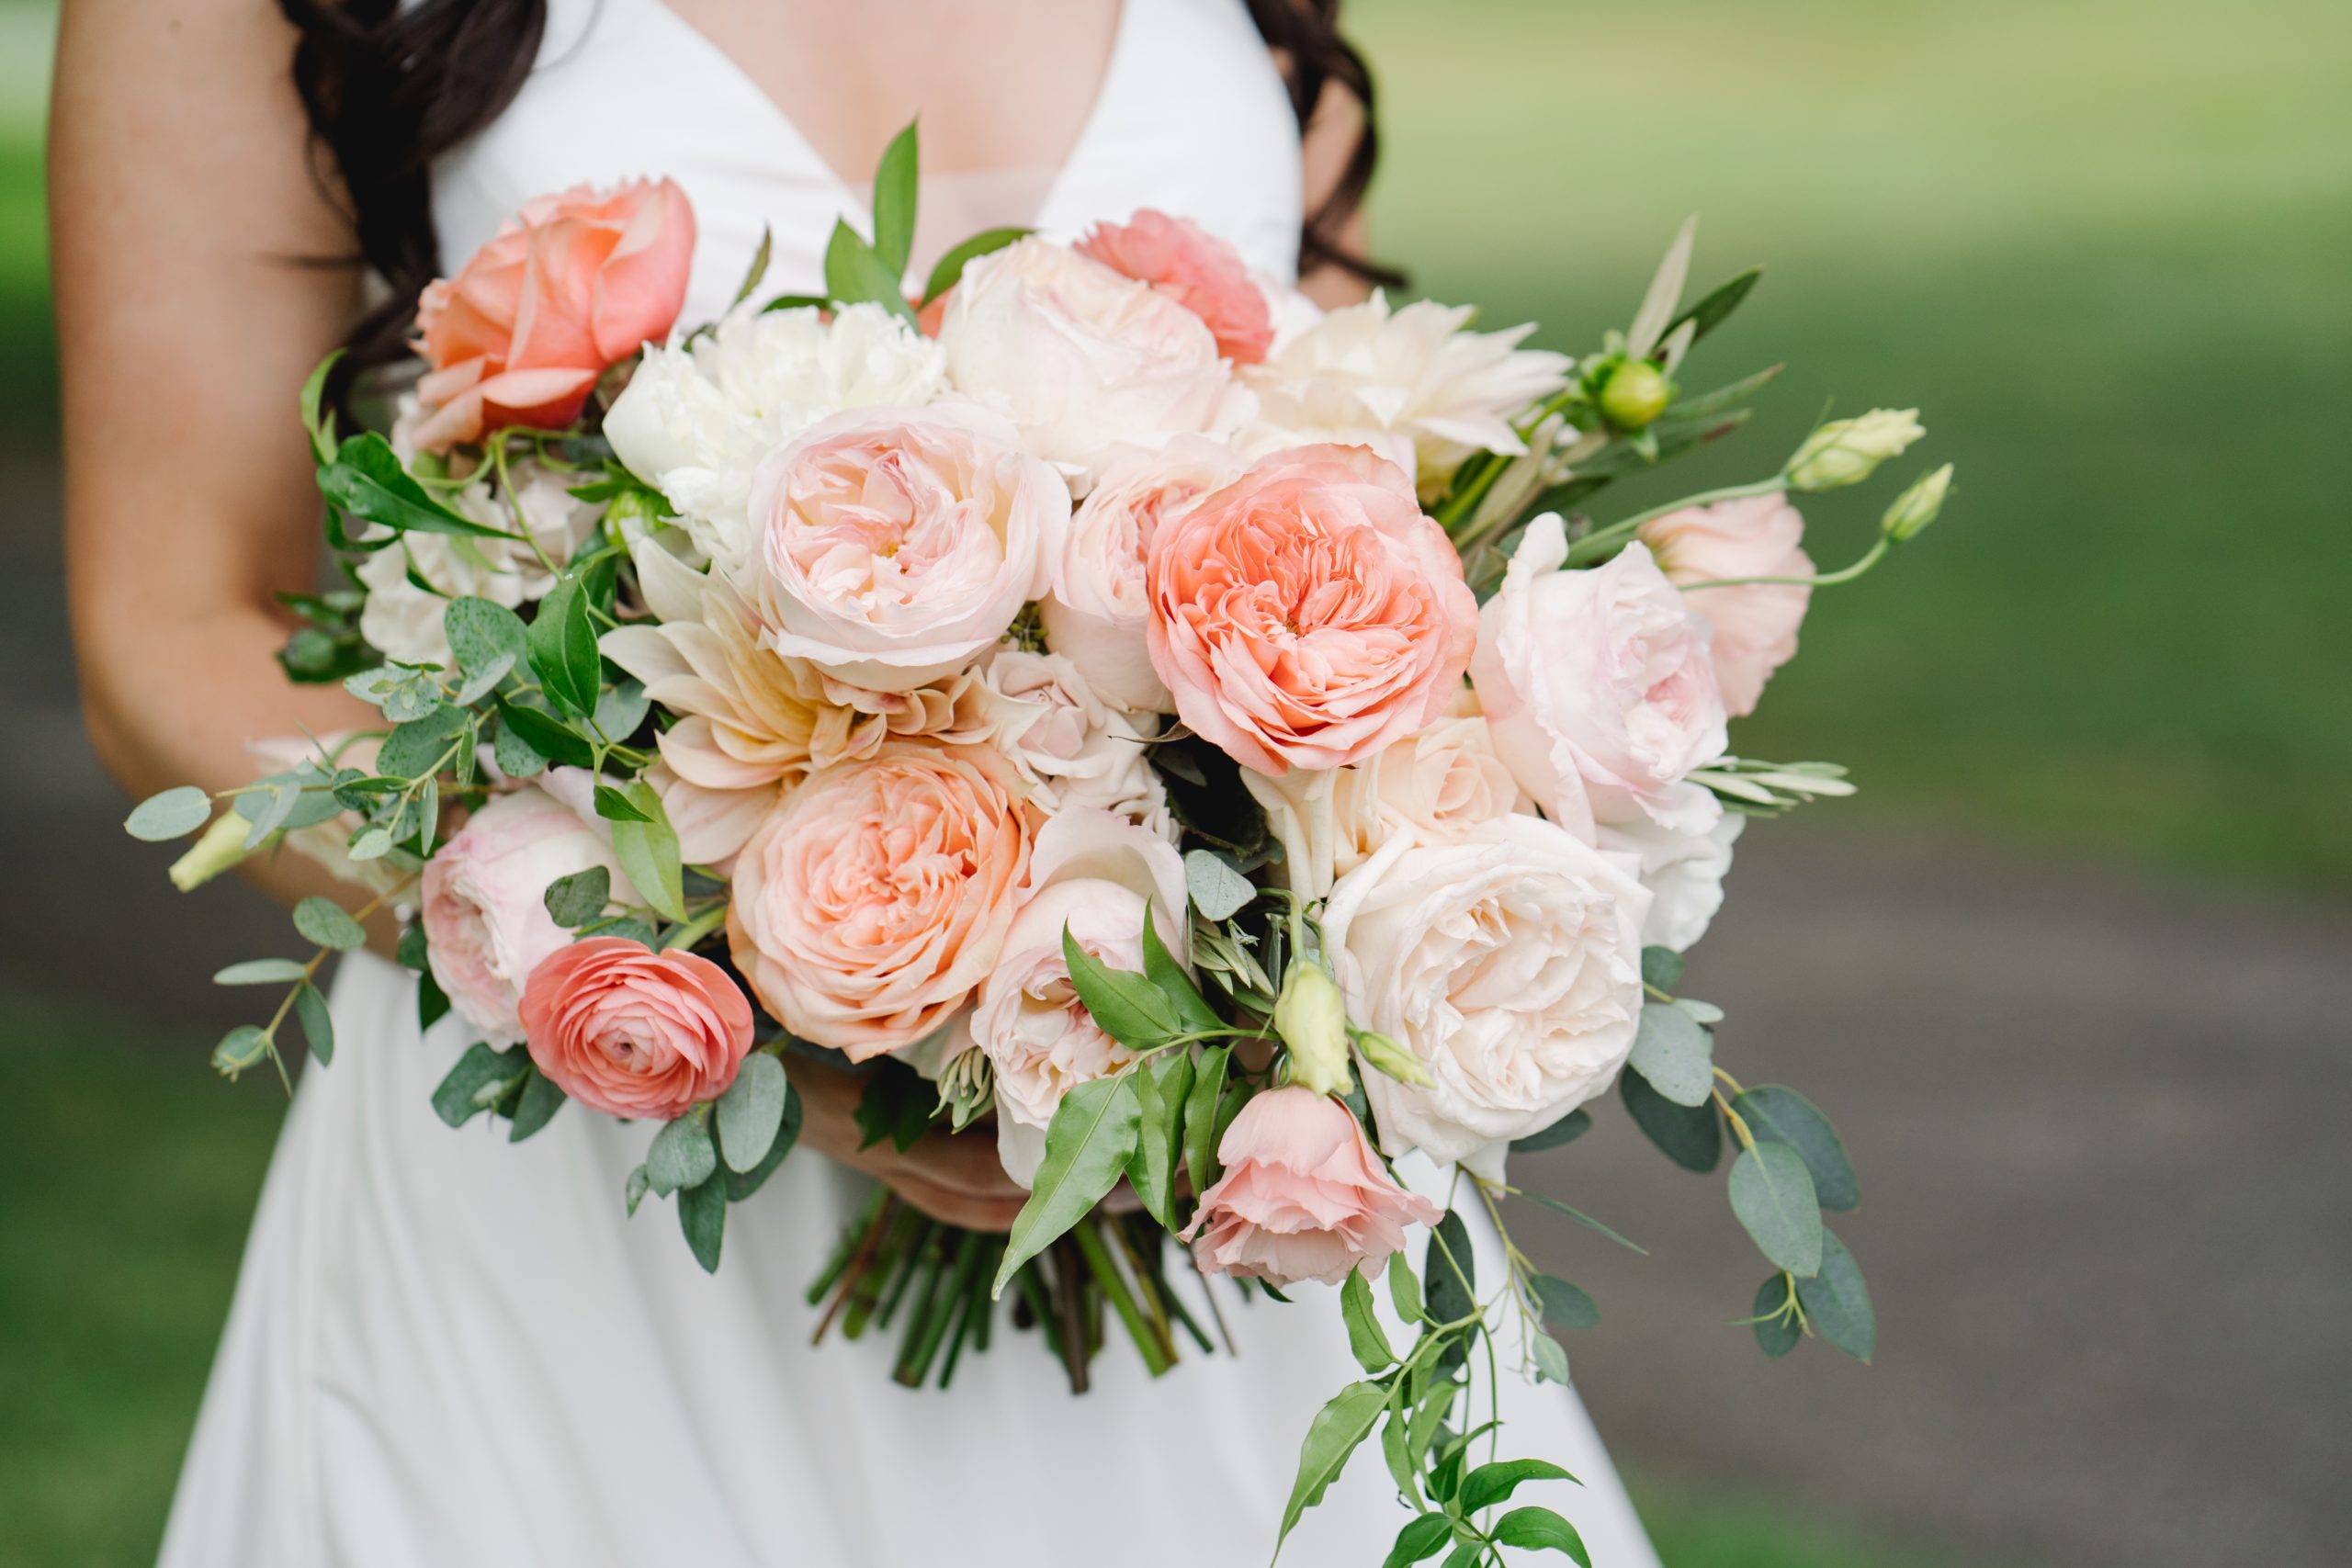 bride holding bouquet of pink, peach, and white garden roses